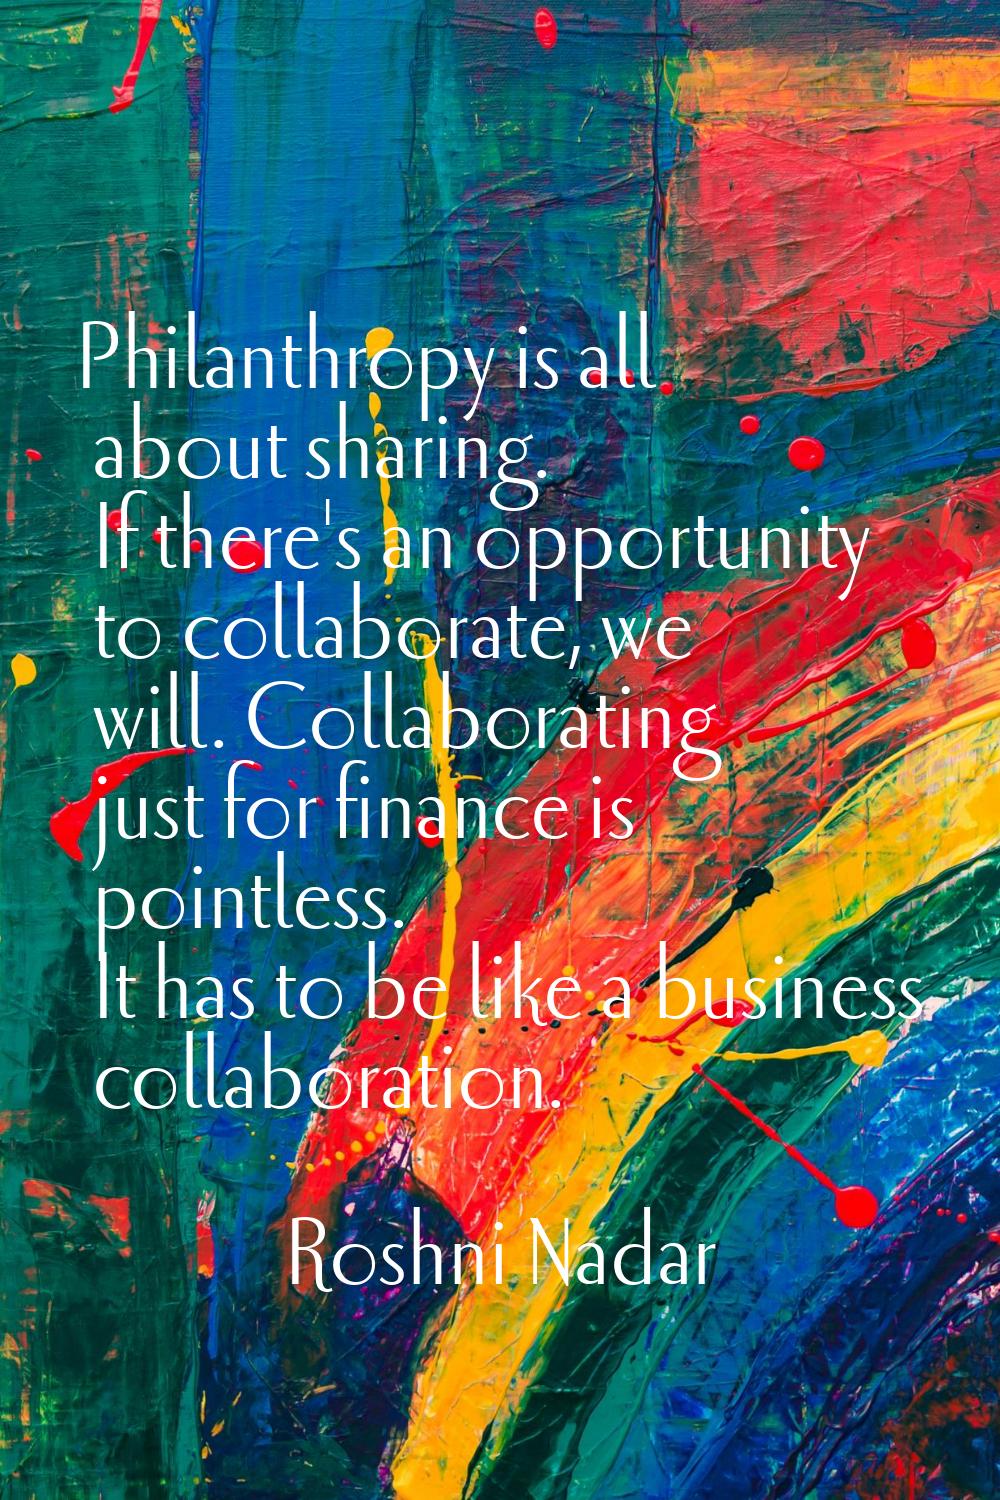 Philanthropy is all about sharing. If there's an opportunity to collaborate, we will. Collaborating